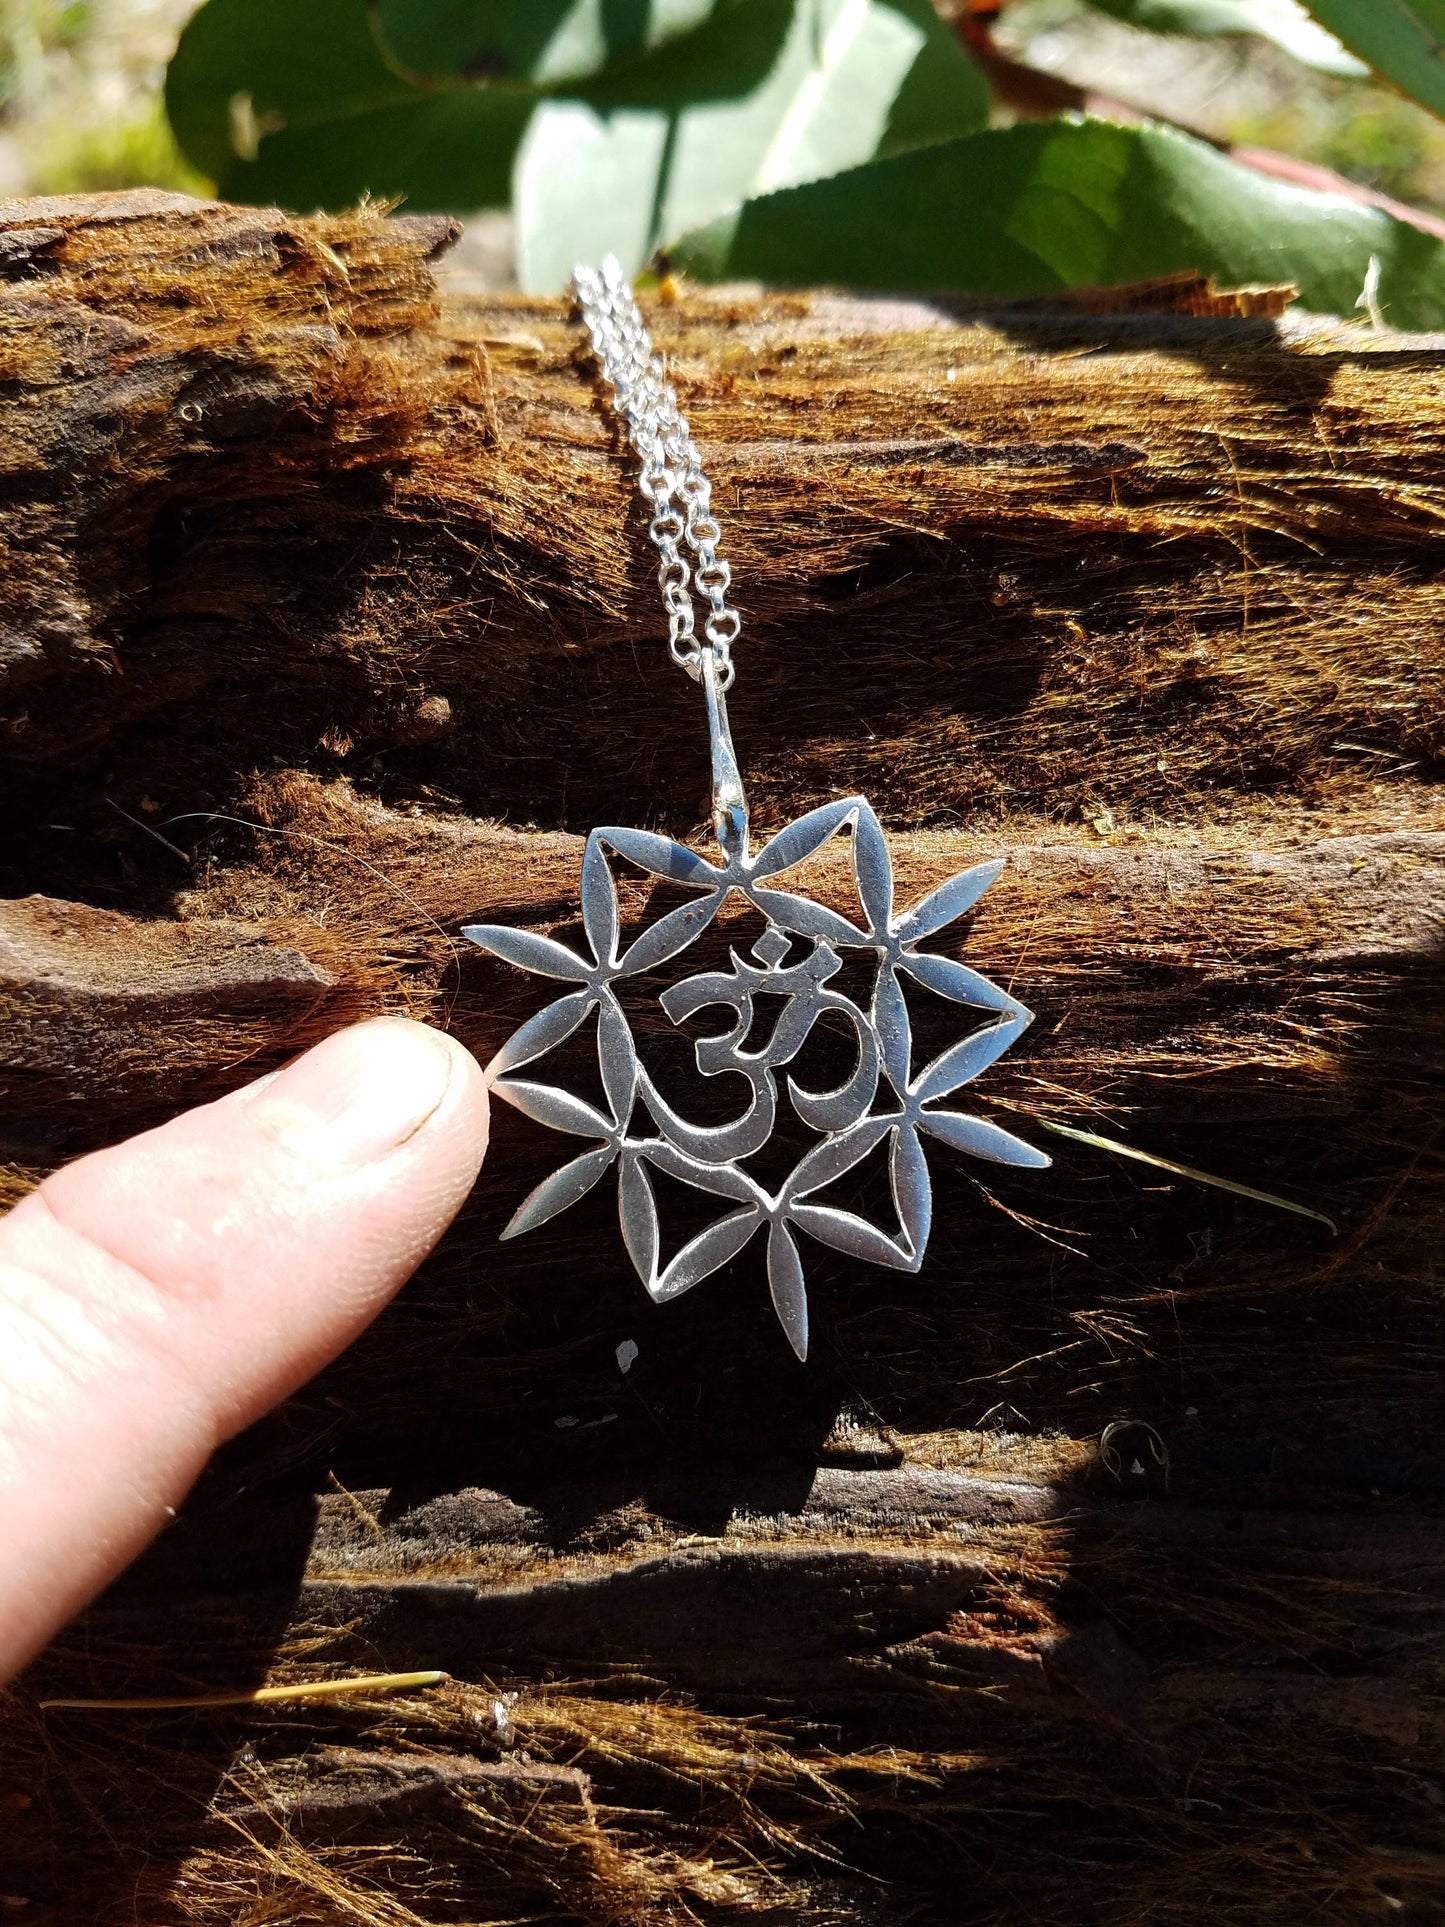 Om and Flower of Life Pendant in Recycled Sterling Silver - Sacred Geometry